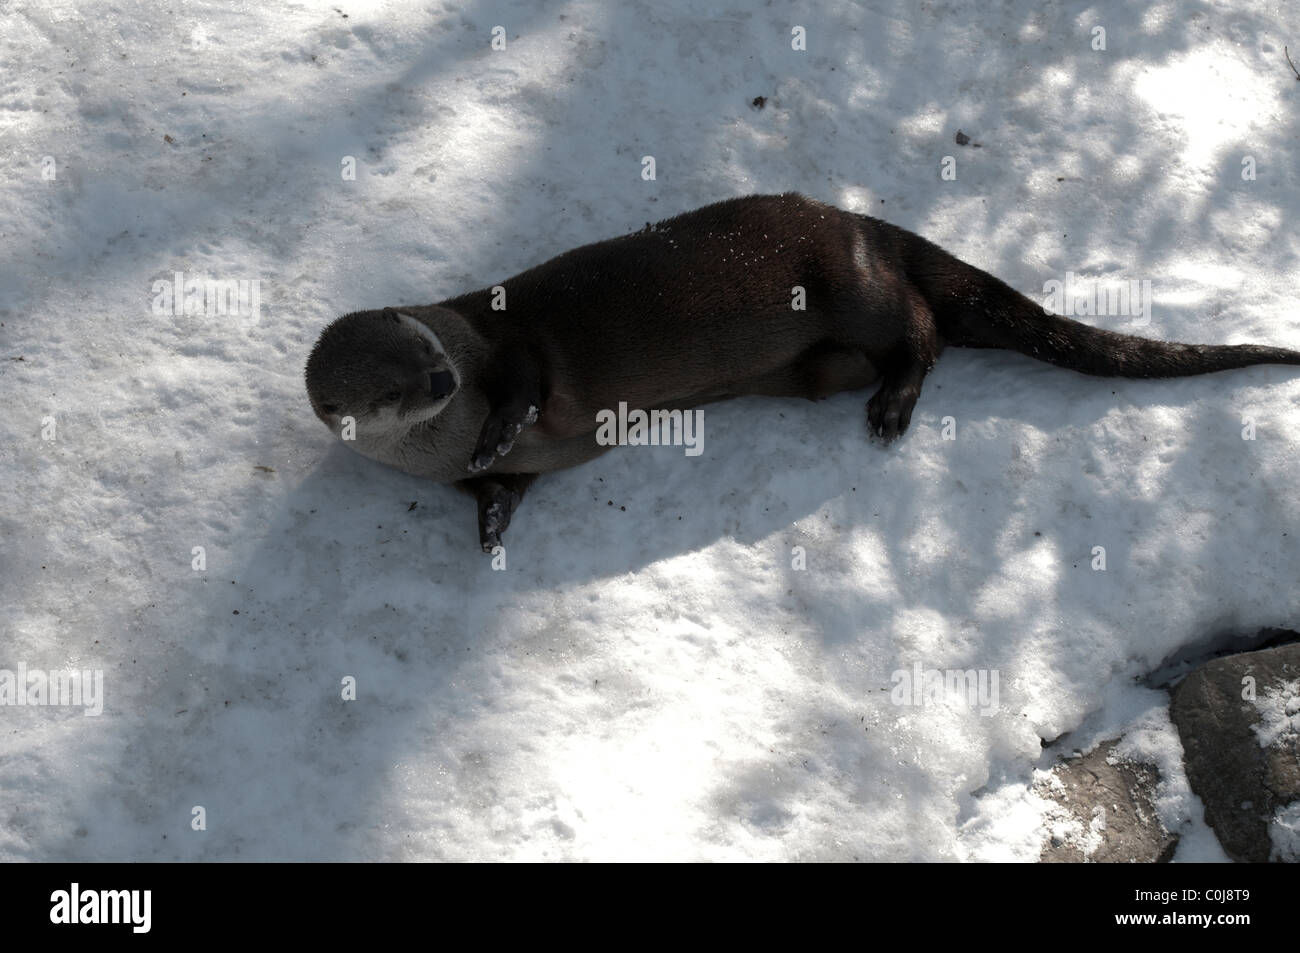 North American River Otter (Lontra canadensis) Stock Photo